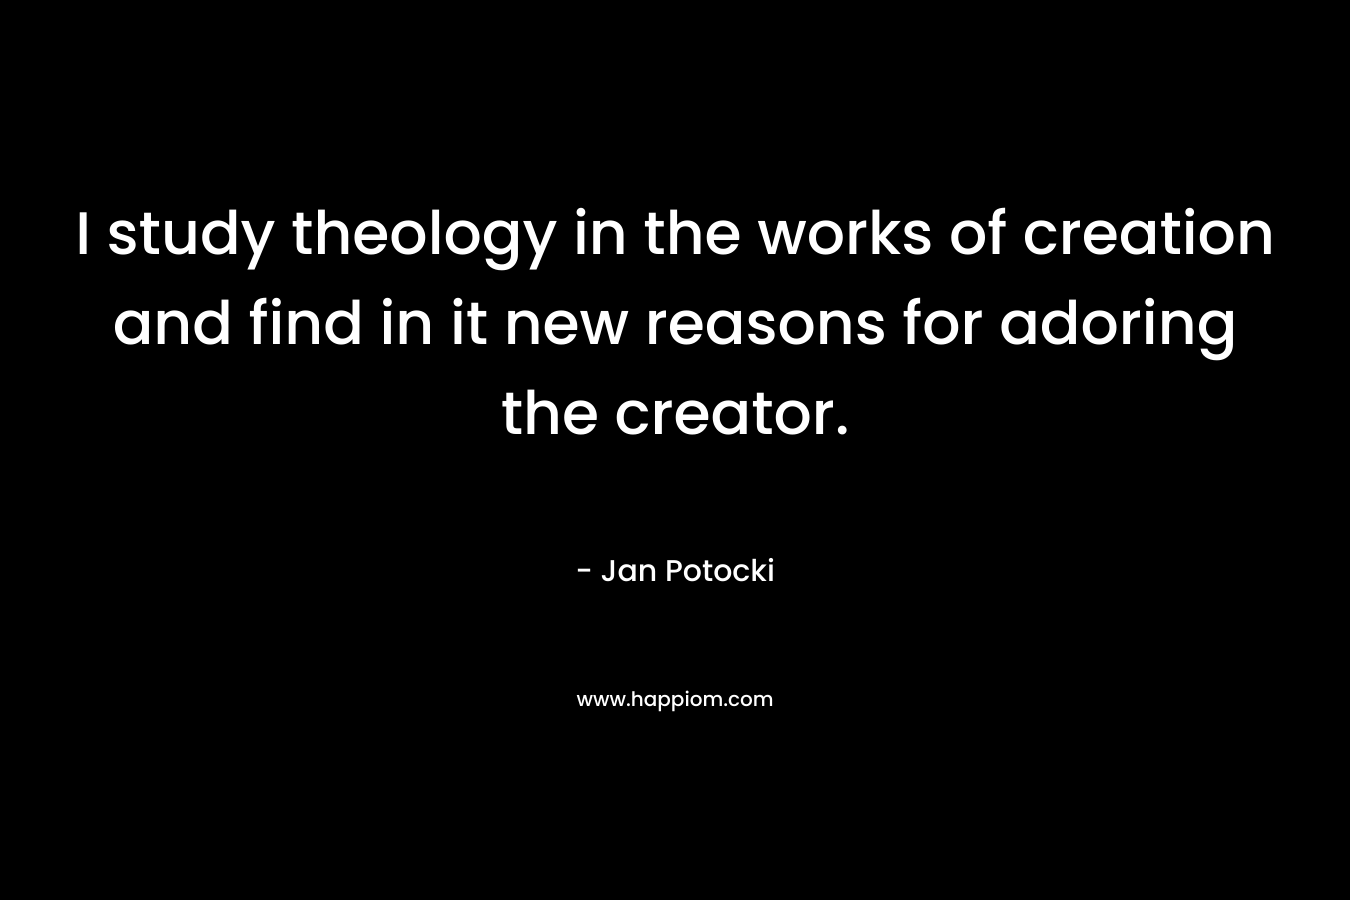 I study theology in the works of creation and find in it new reasons for adoring the creator.